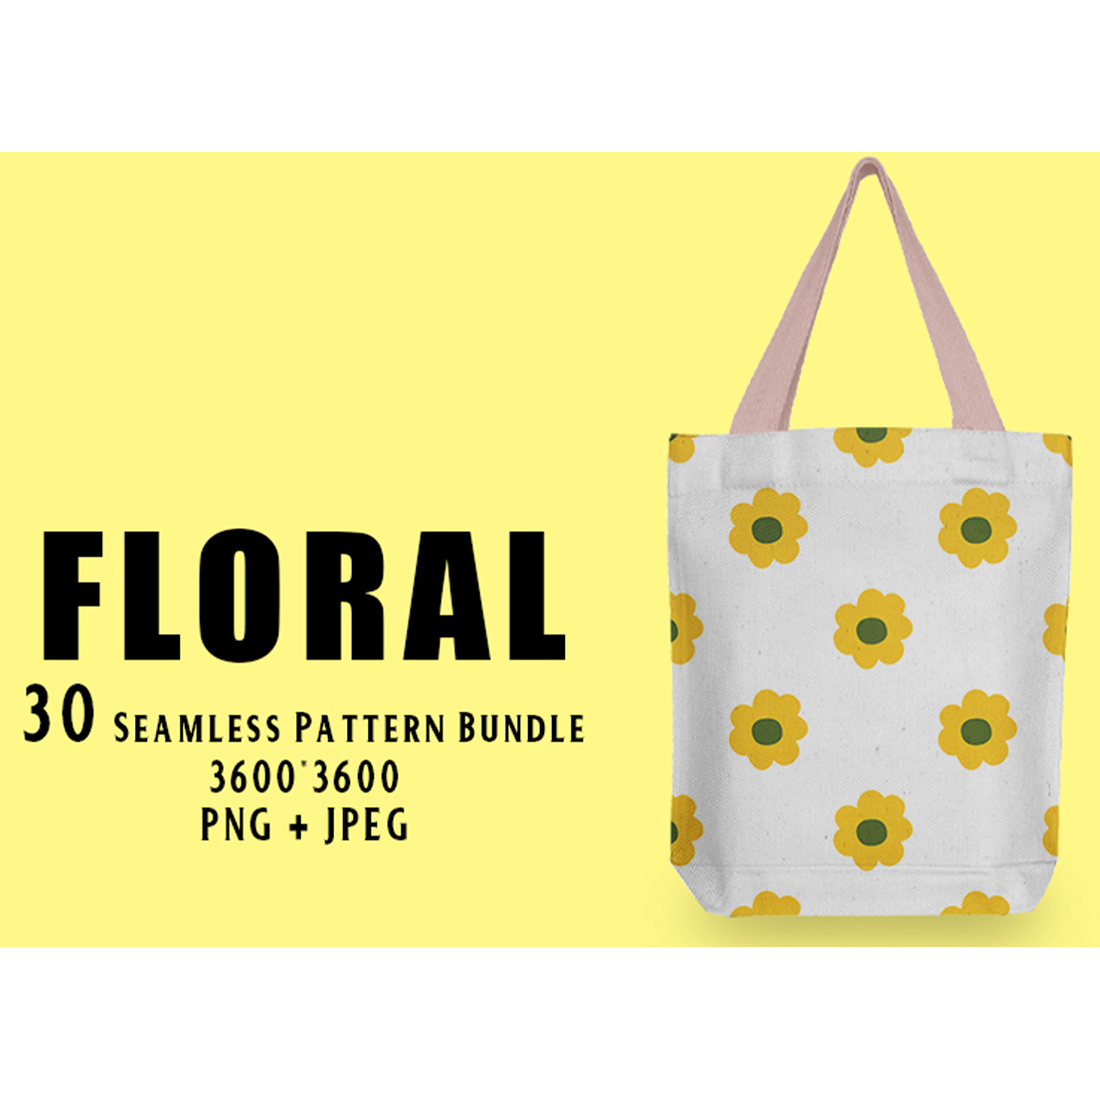 Image of a bag with amazing patterns of yellow flowers